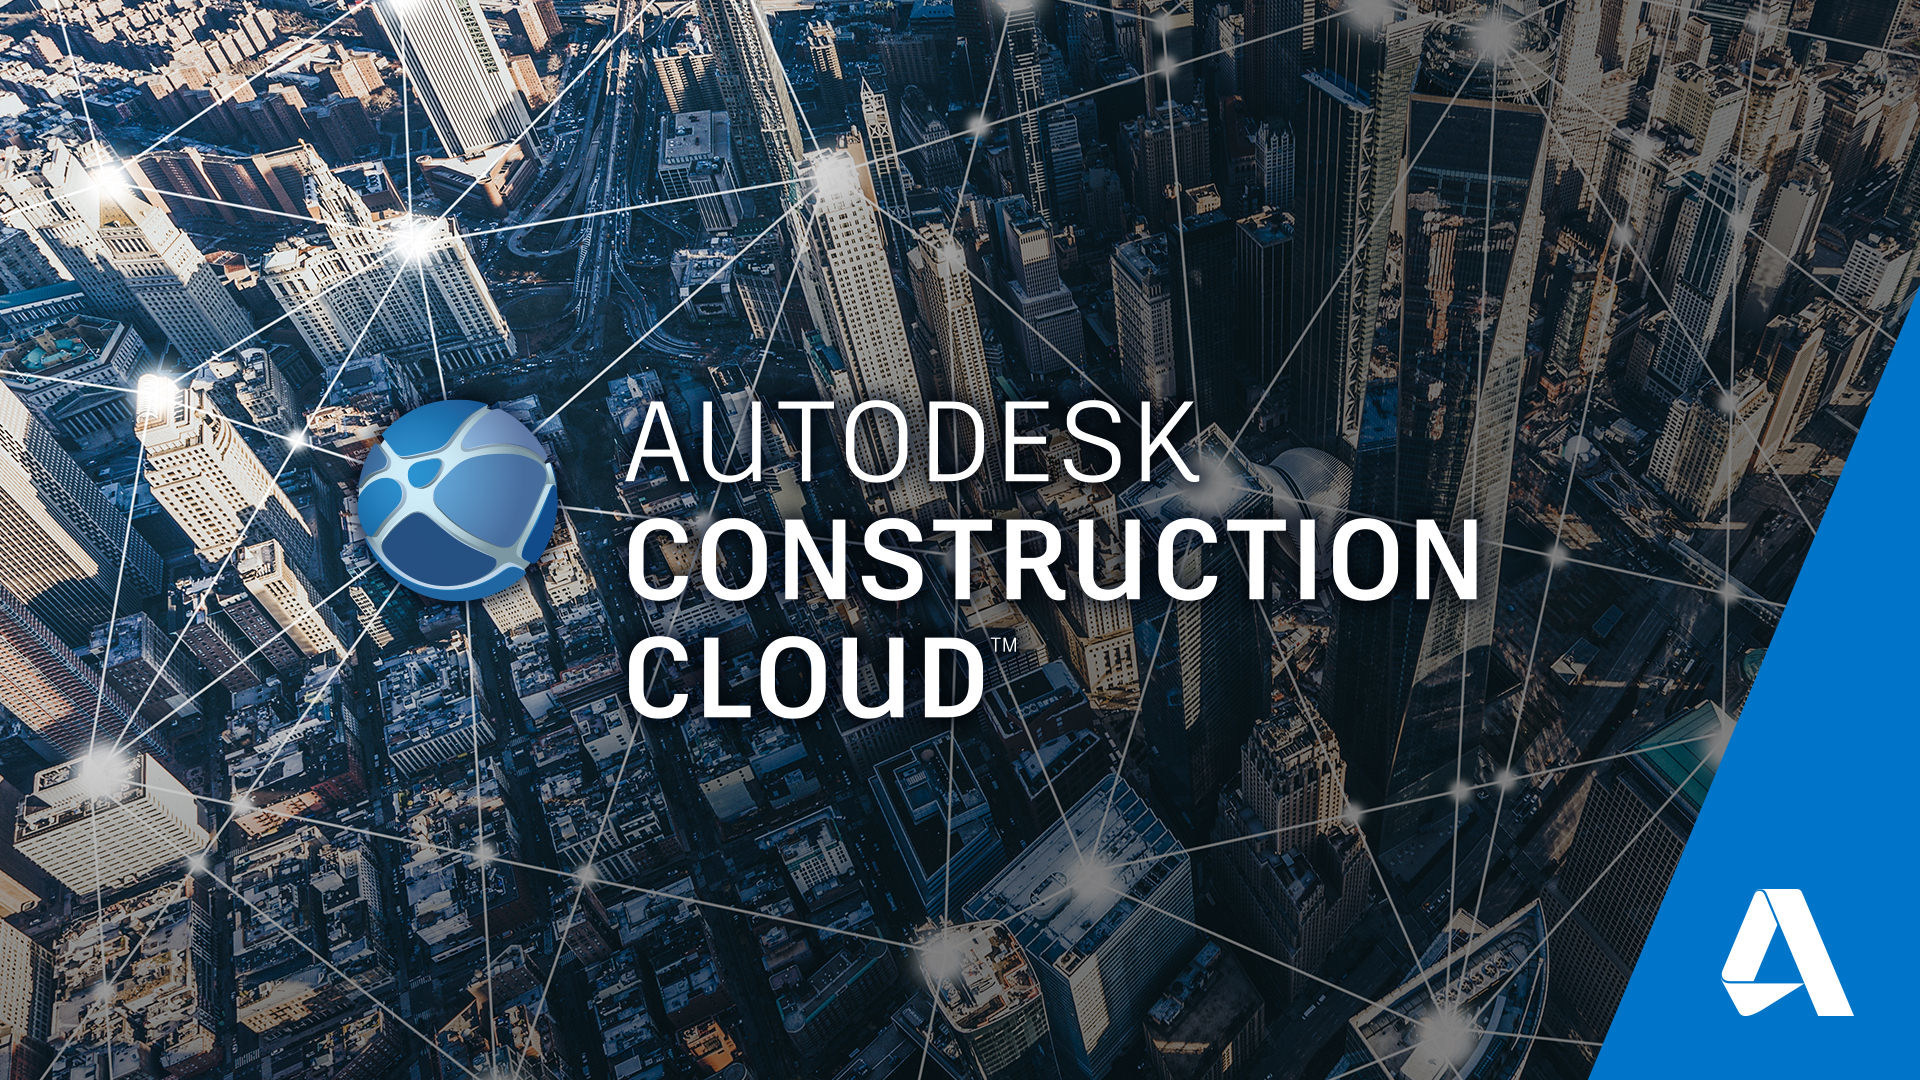 Autodesk Construction Cloud Expands with Powerful New Project Management, Quantification and Design Coordination Products